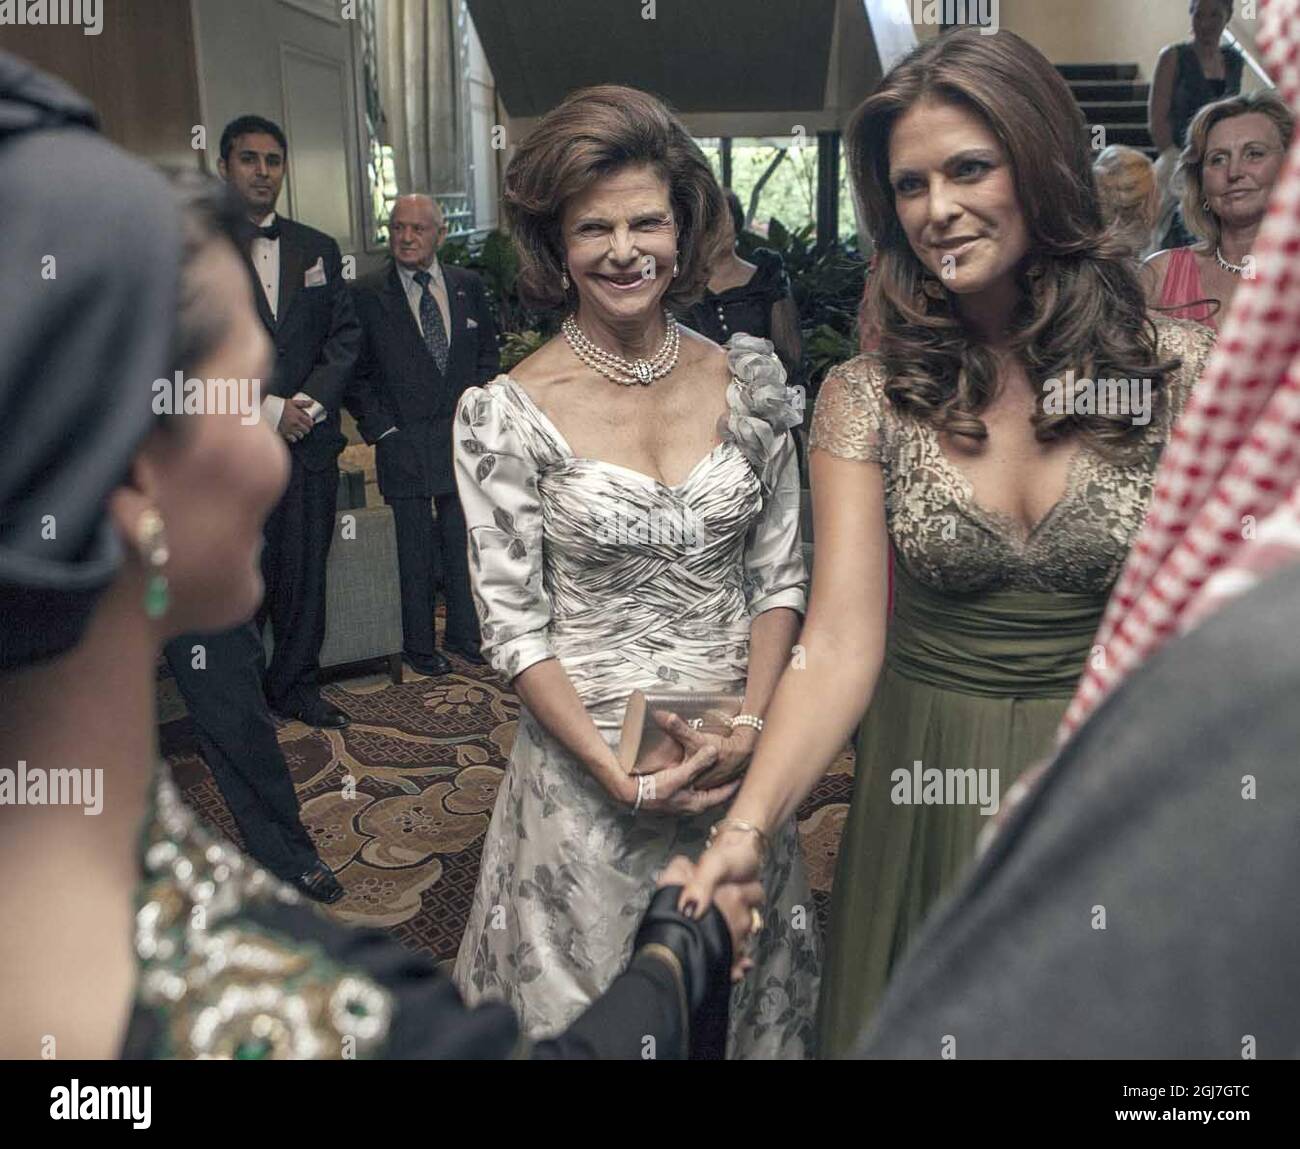 STOCKHOLM 2012-09-20 Queen Silvia and Princess Madeleine are seen arriving to a dinner for the Mentor foundation in Washington DC, USA, September 20, 2012. Foto: Axel Ã–berg / XP / SCANPIX / kod 7139 ** OUT SWEDEN OUT ** Stock Photo